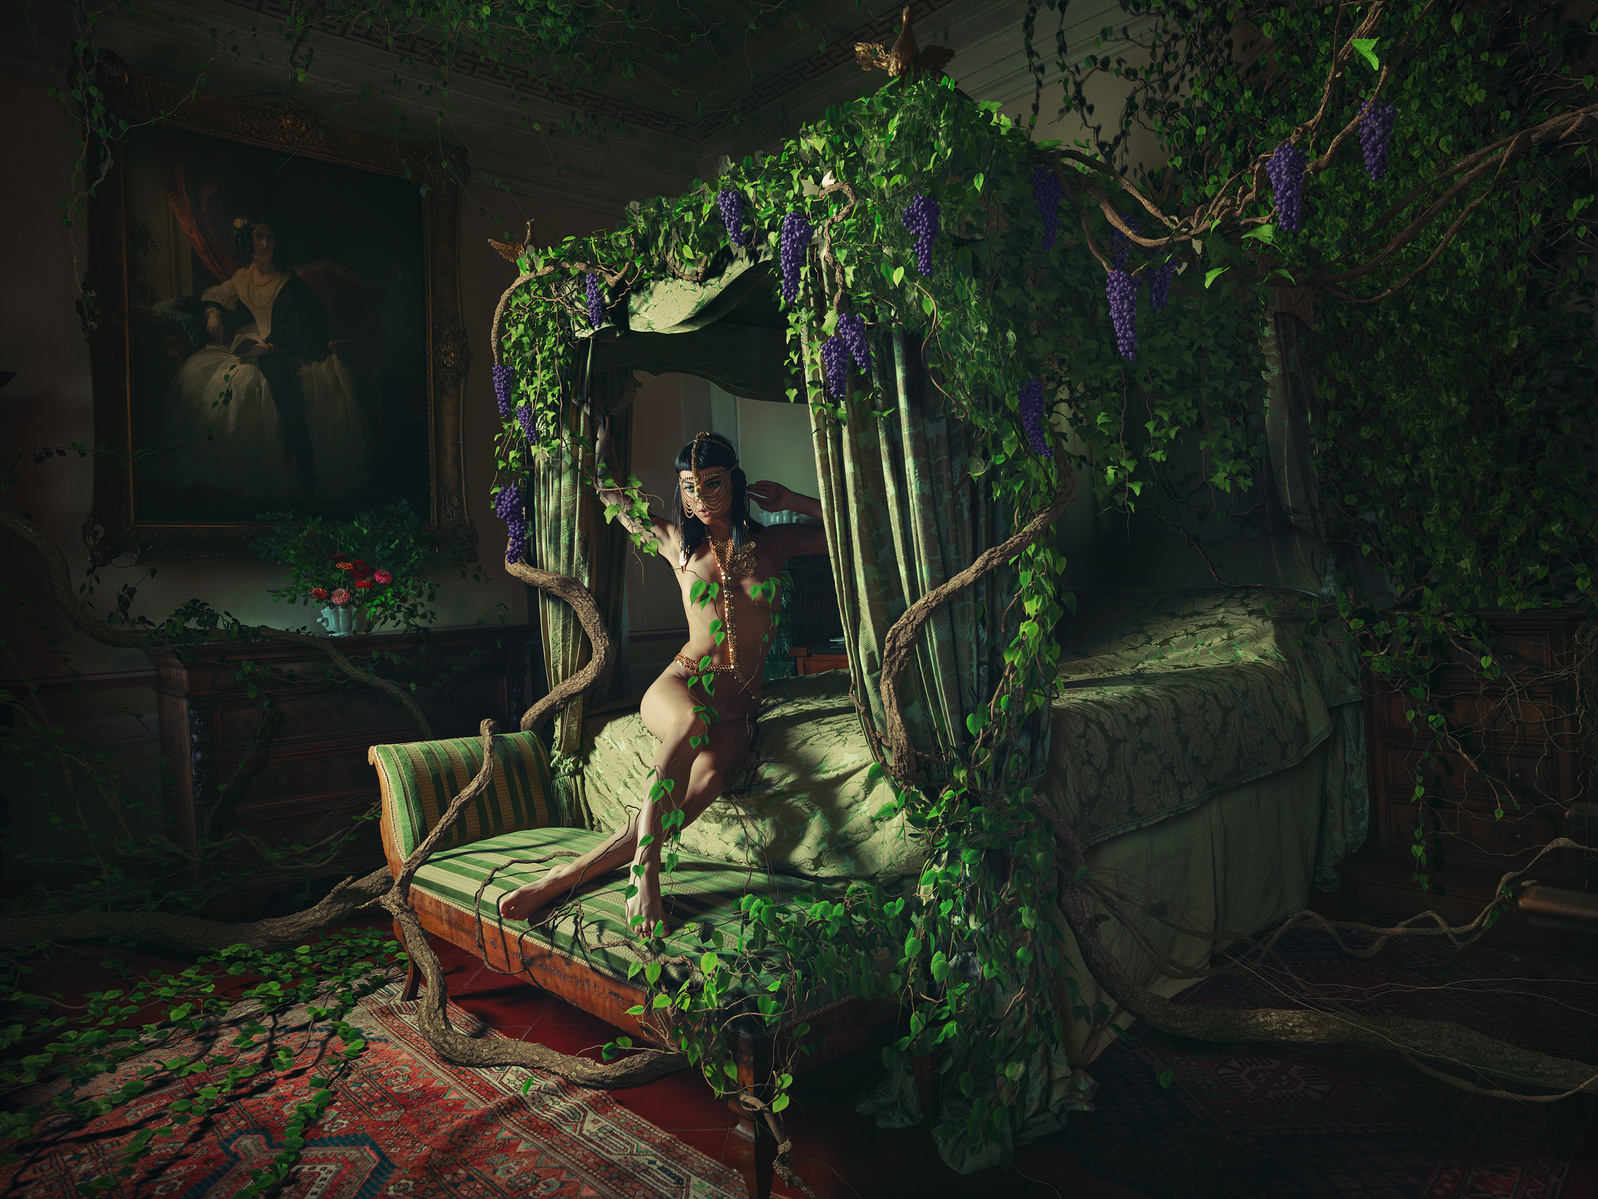 grapevine_miss_aniela_for_web_3000px